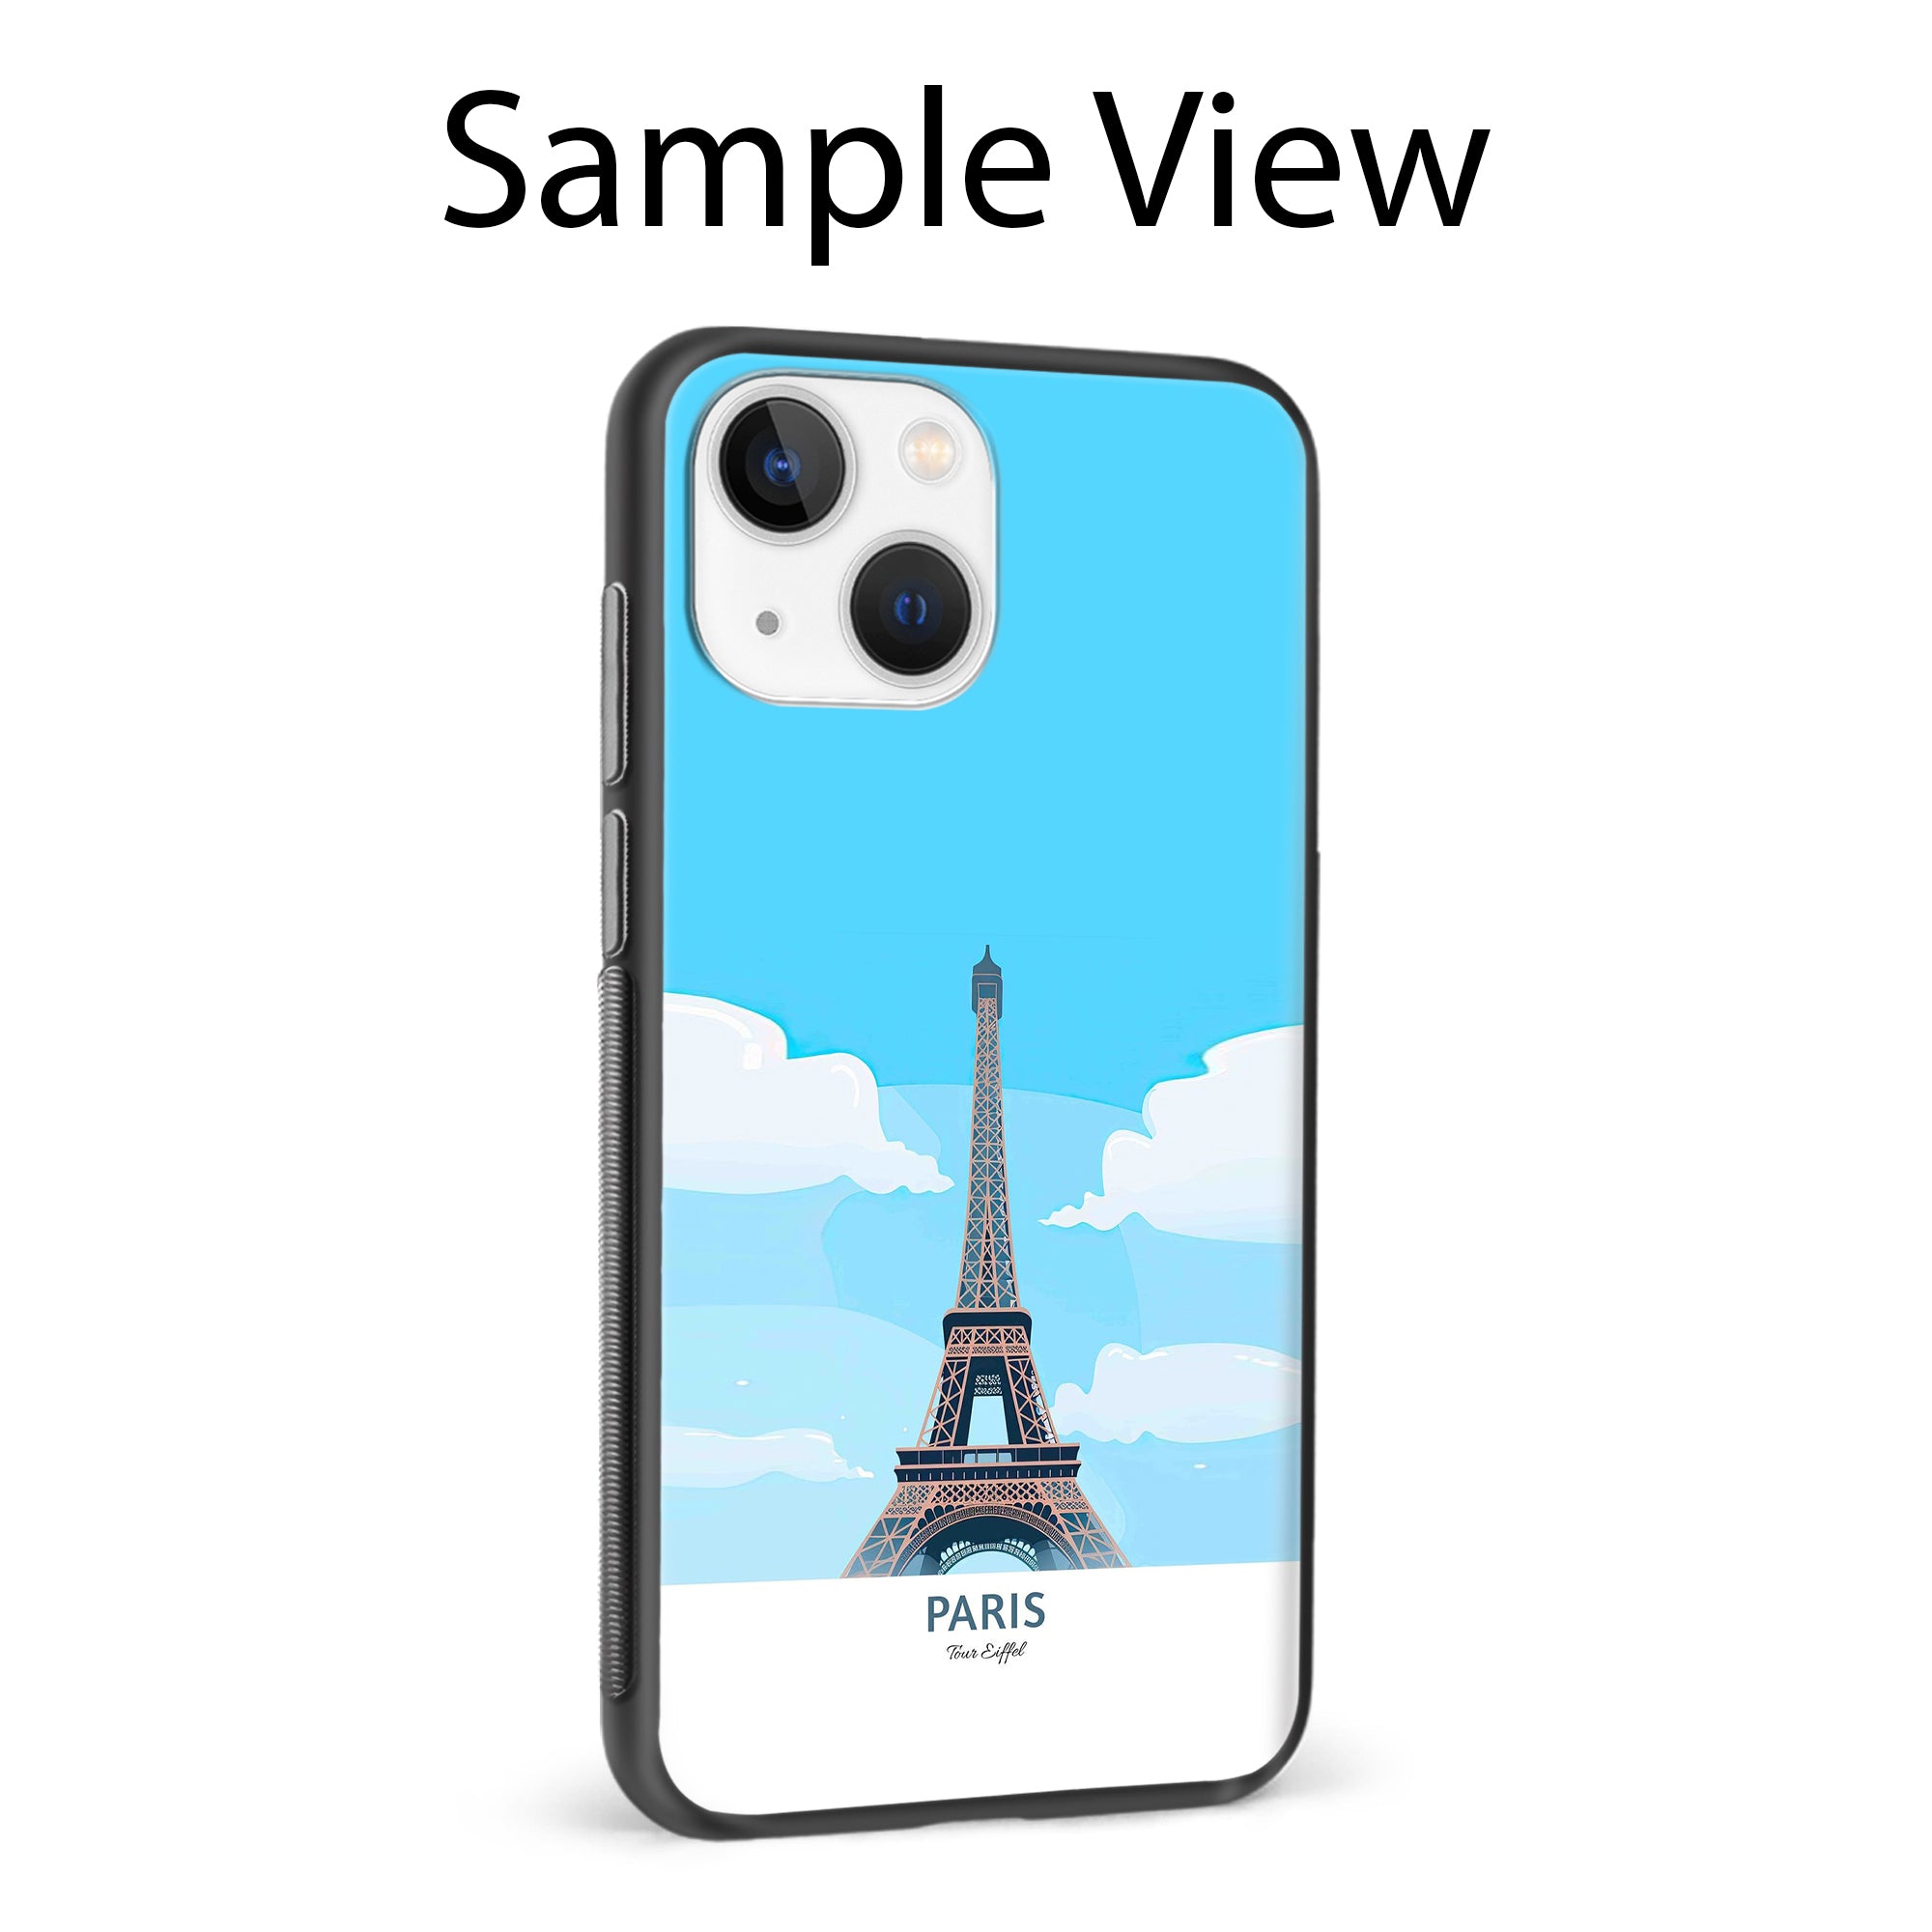 Buy Paris Metal-Silicon Back Mobile Phone Case/Cover For Samsung Galaxy S21 Ultra Online